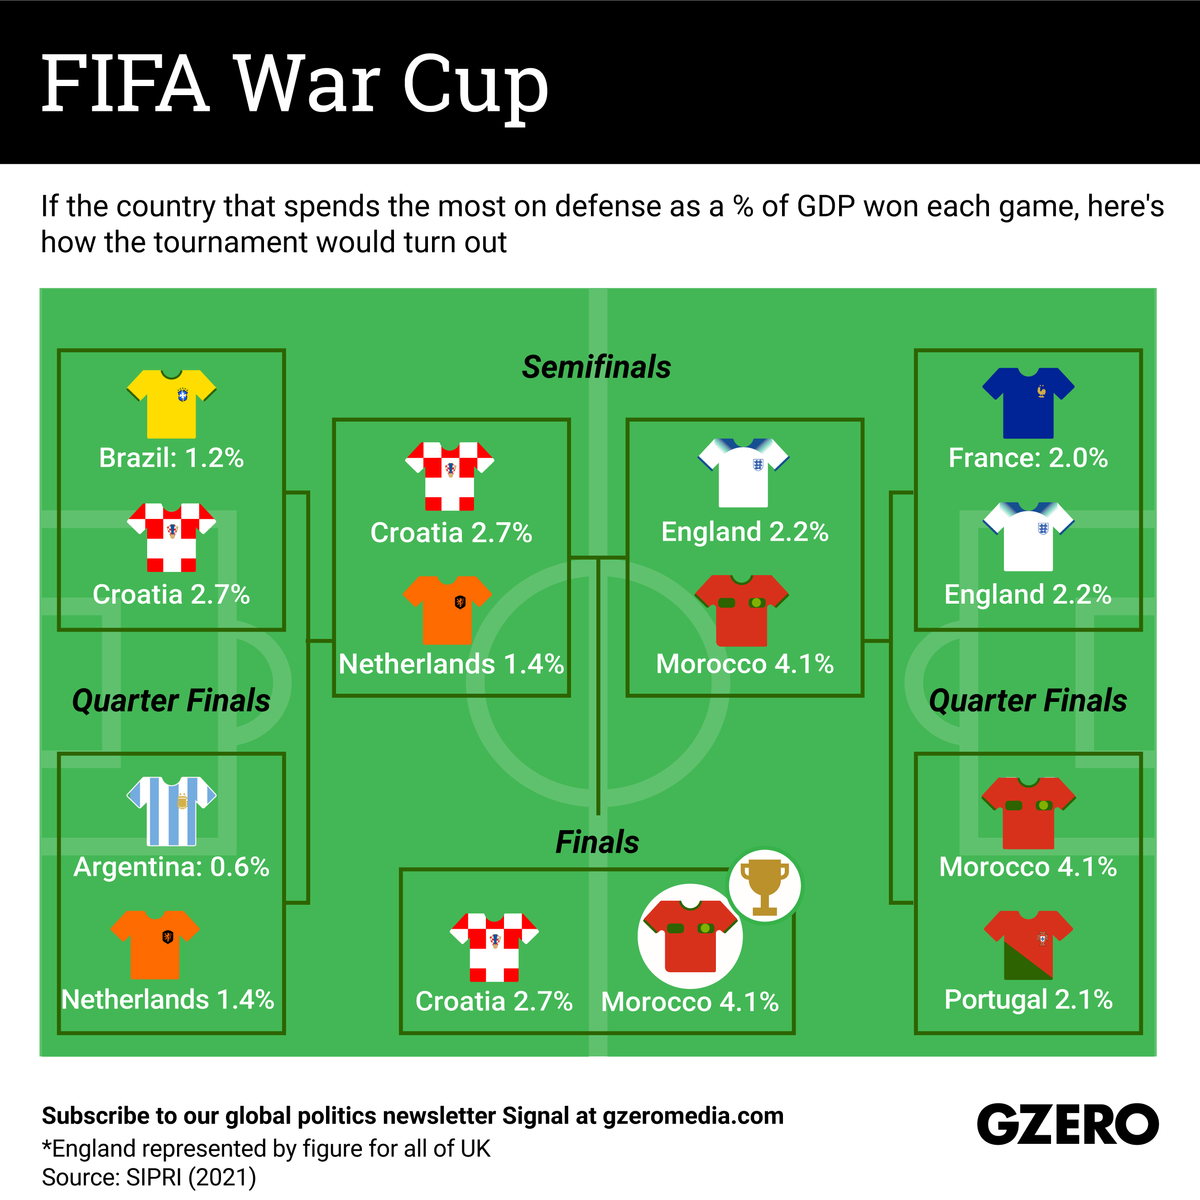 World Cup brackets on a soccer pitch background showing who'd win based on defense spending